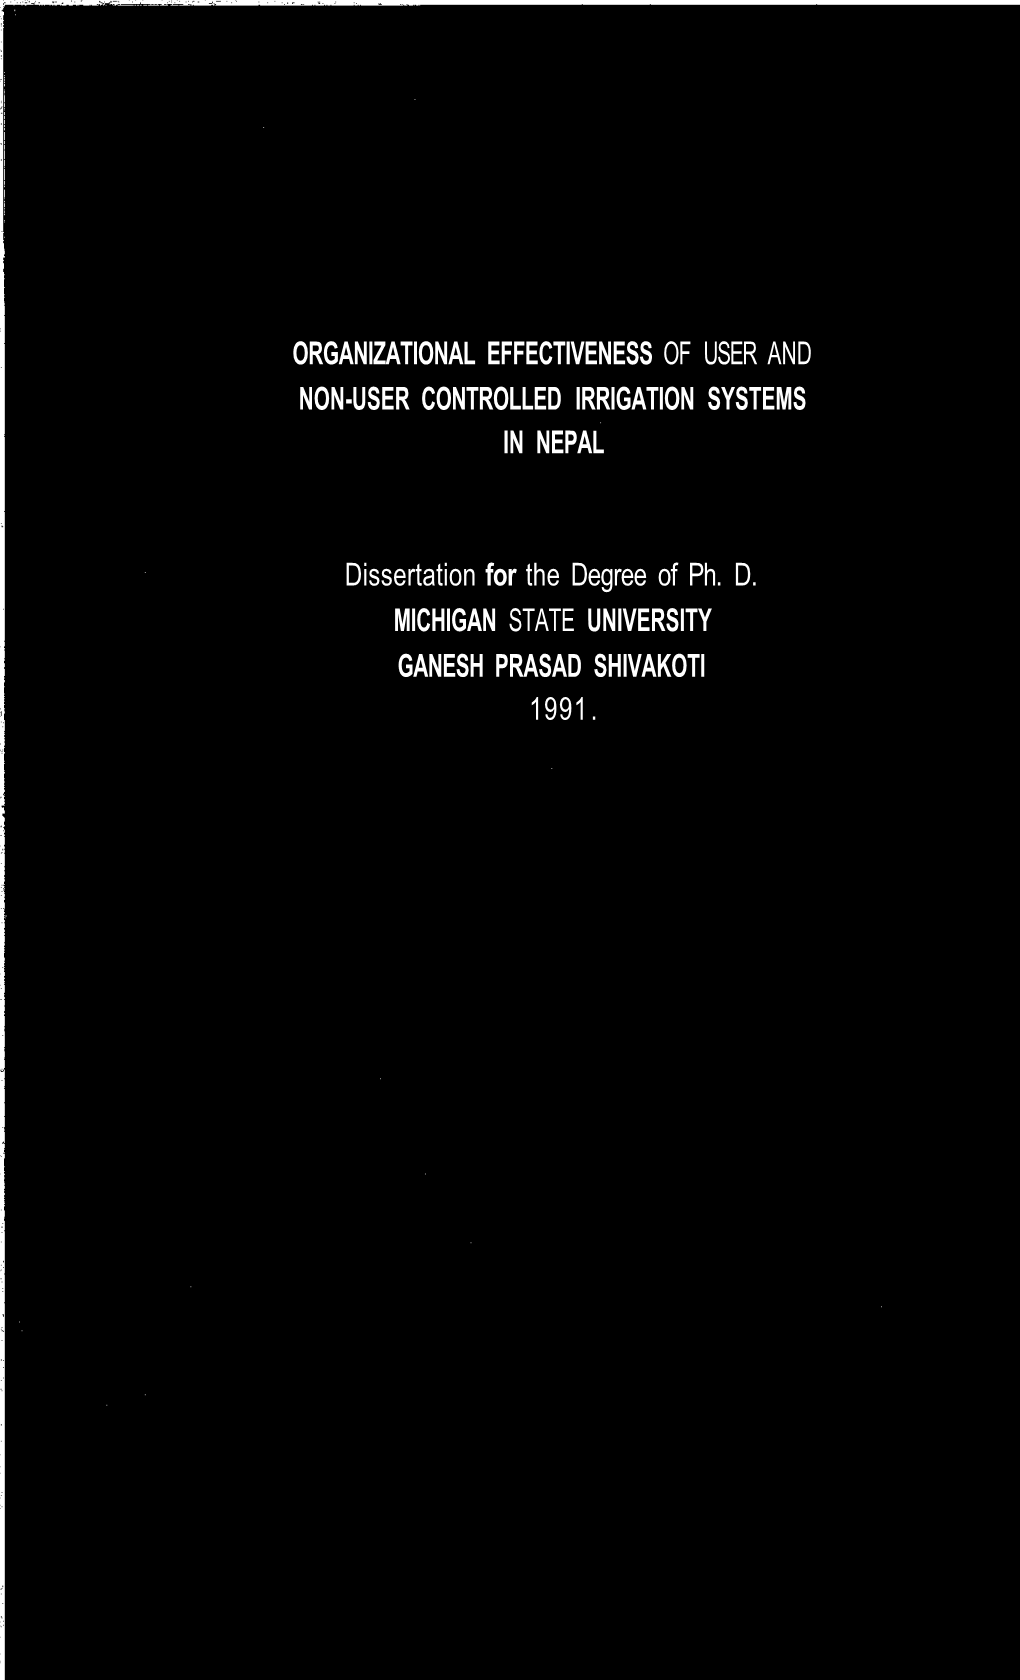 Organizational Effectiveness of User and Non-User Controlled Irrigation Systems in Nepal